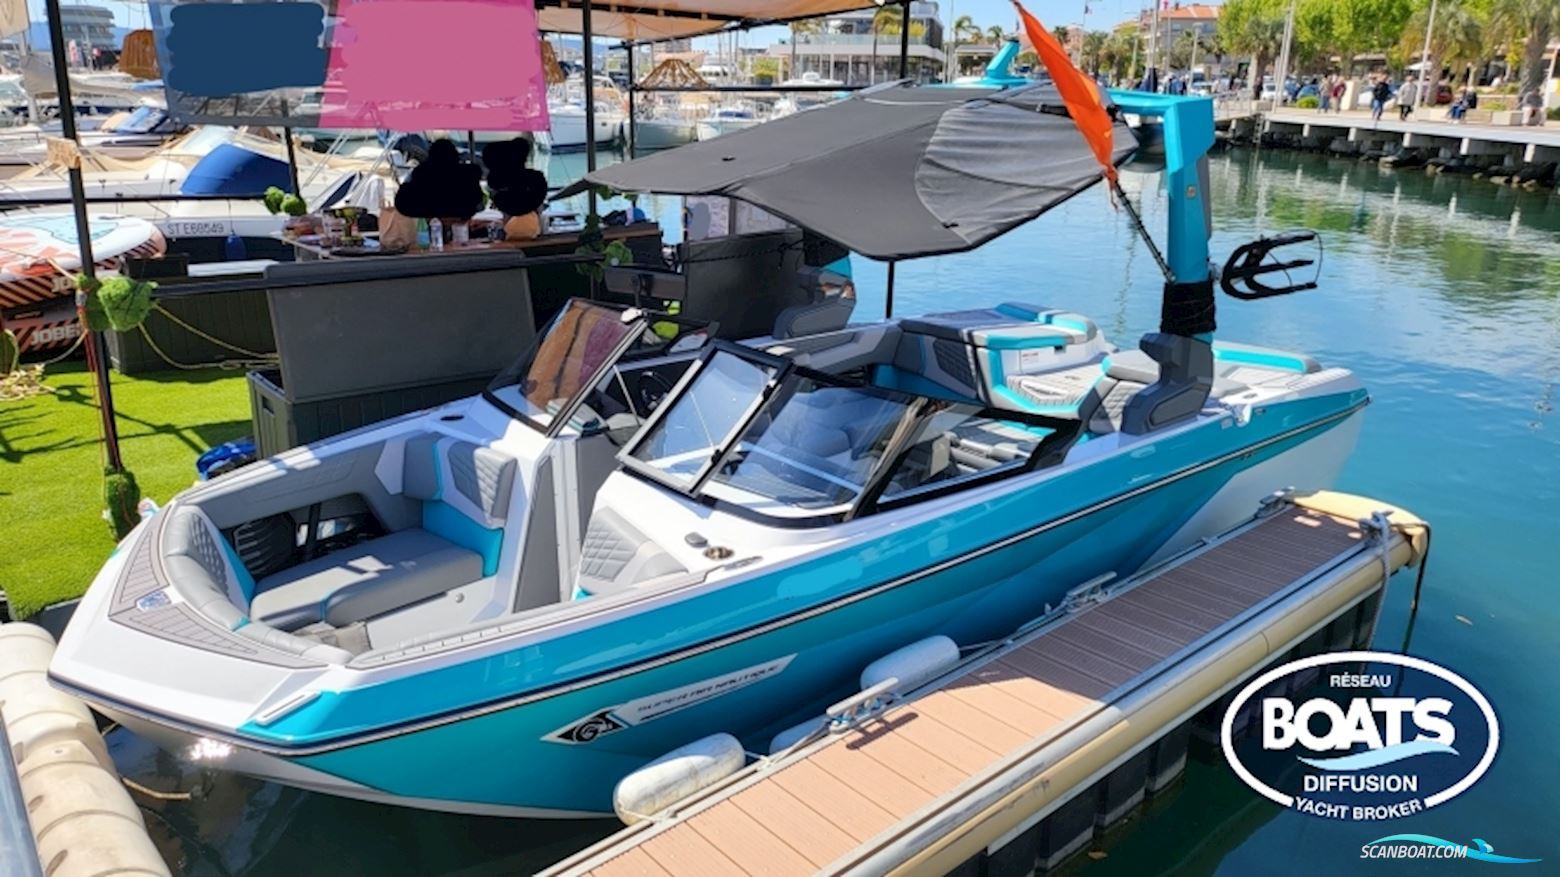 Correct Craft Super Air Nautique G21 Motor boat 2023, with Pcm engine, France